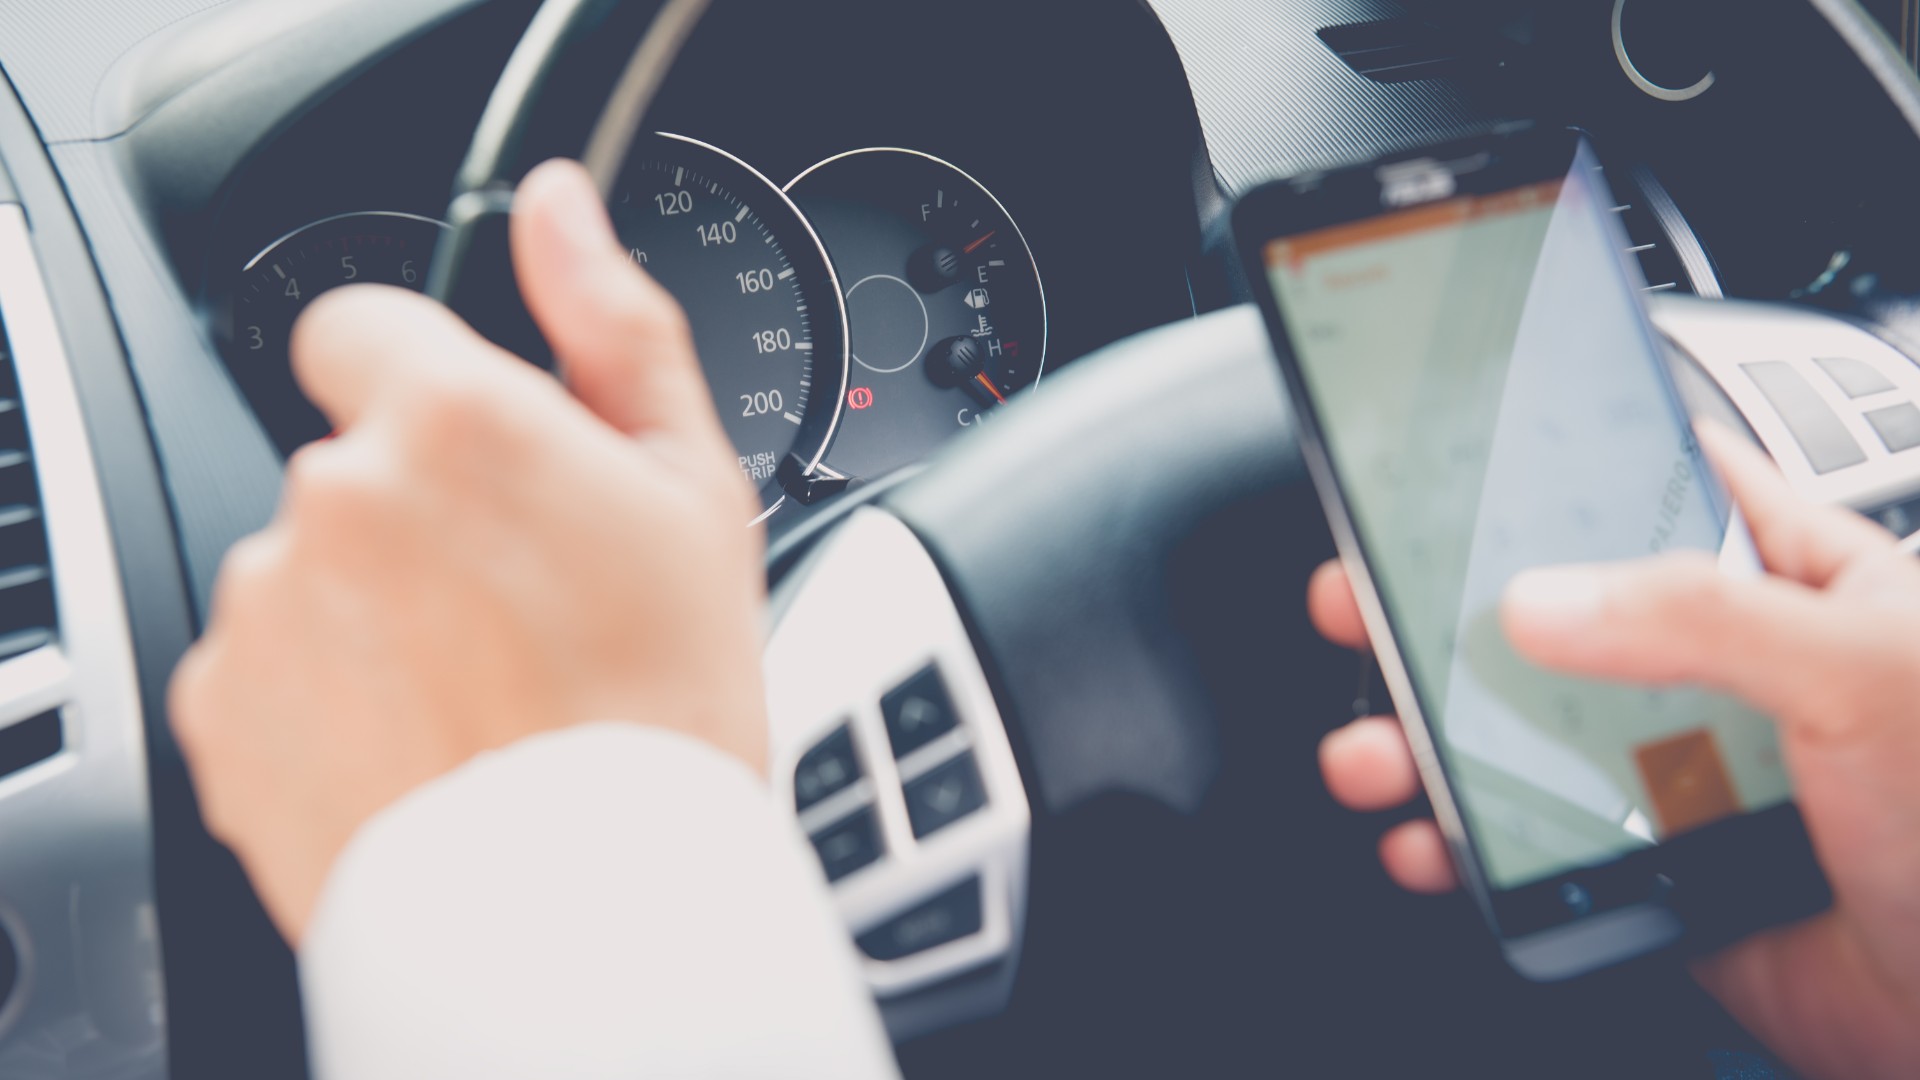 mobile phone driving laws could 'change quickly'